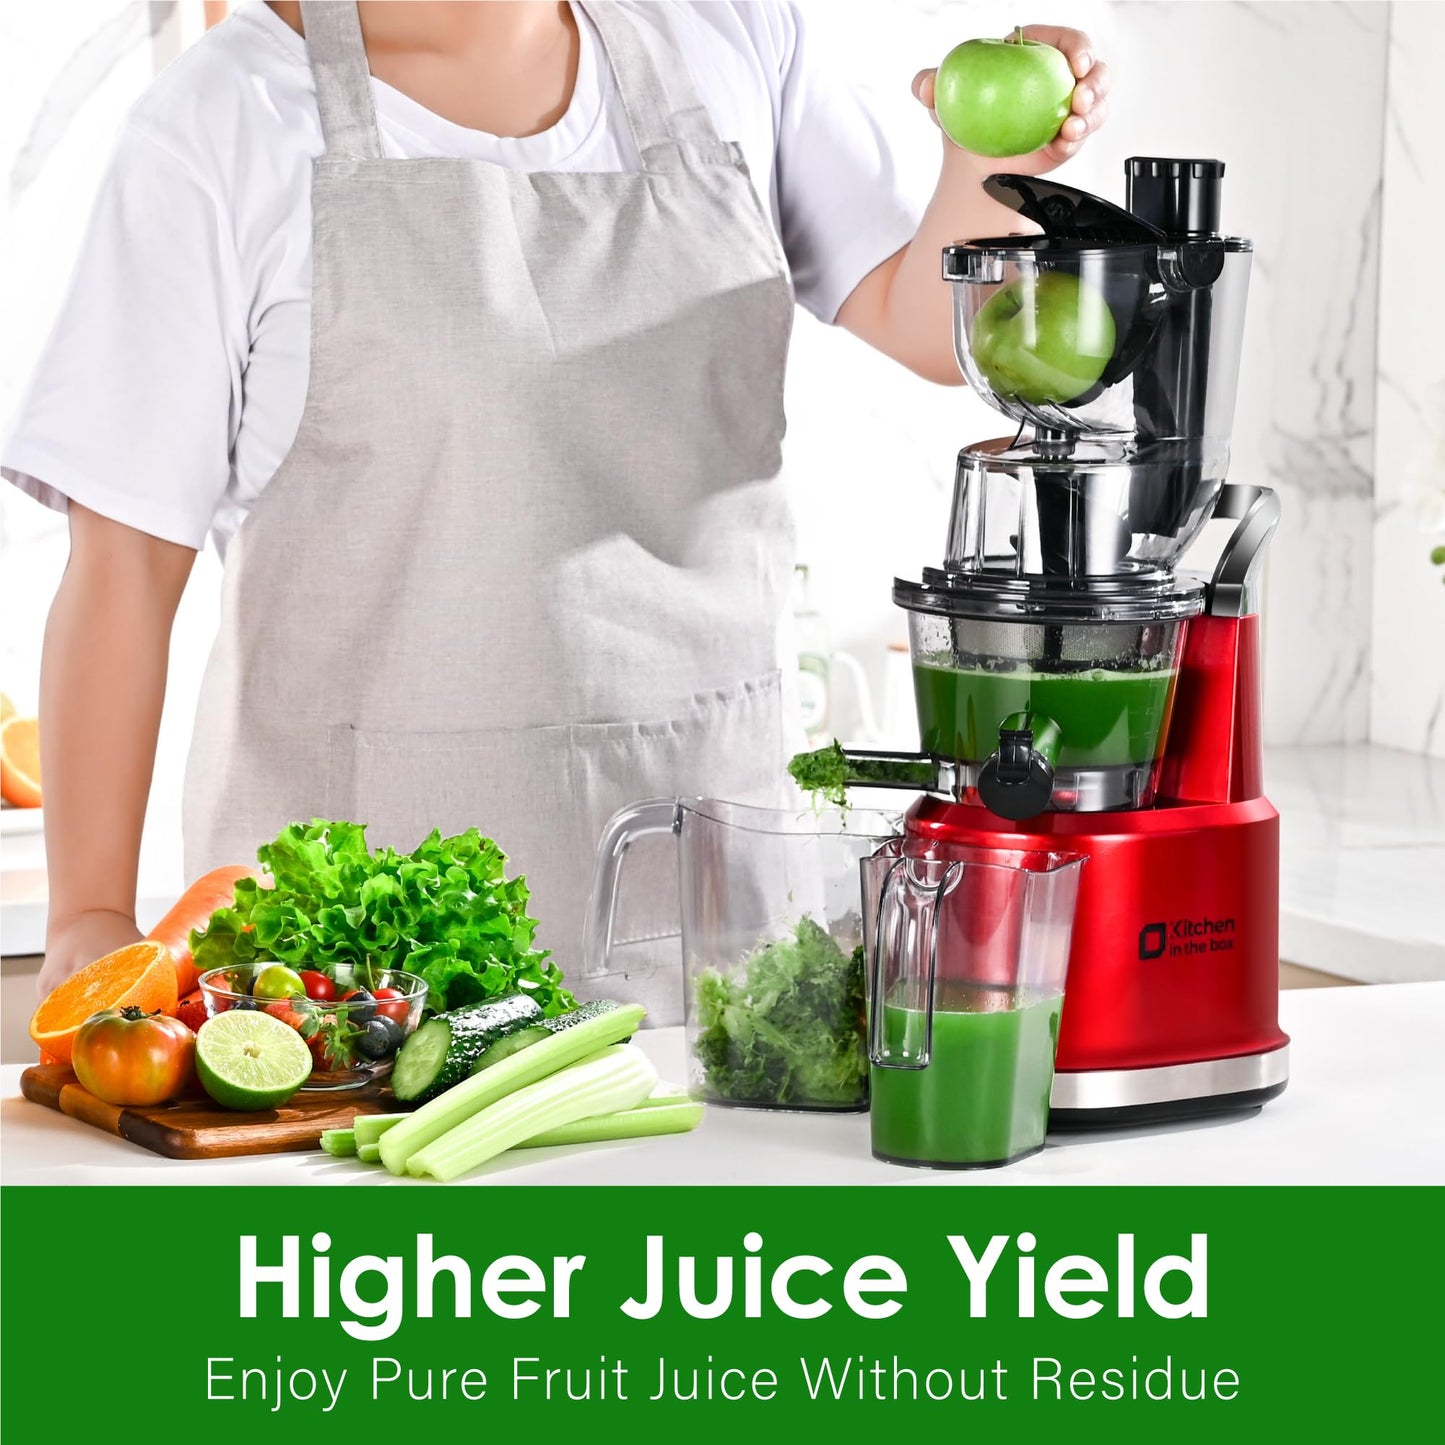 Kitchen in the Box Cold Press Juicer Machines,Slow Masticating Juicer Machine, With 3.26" Wide Feed Chute for Whole Fruits and Vegetables,BPA-Free,High Juice Yield Juicer Maker,Easy to Clean (Red)